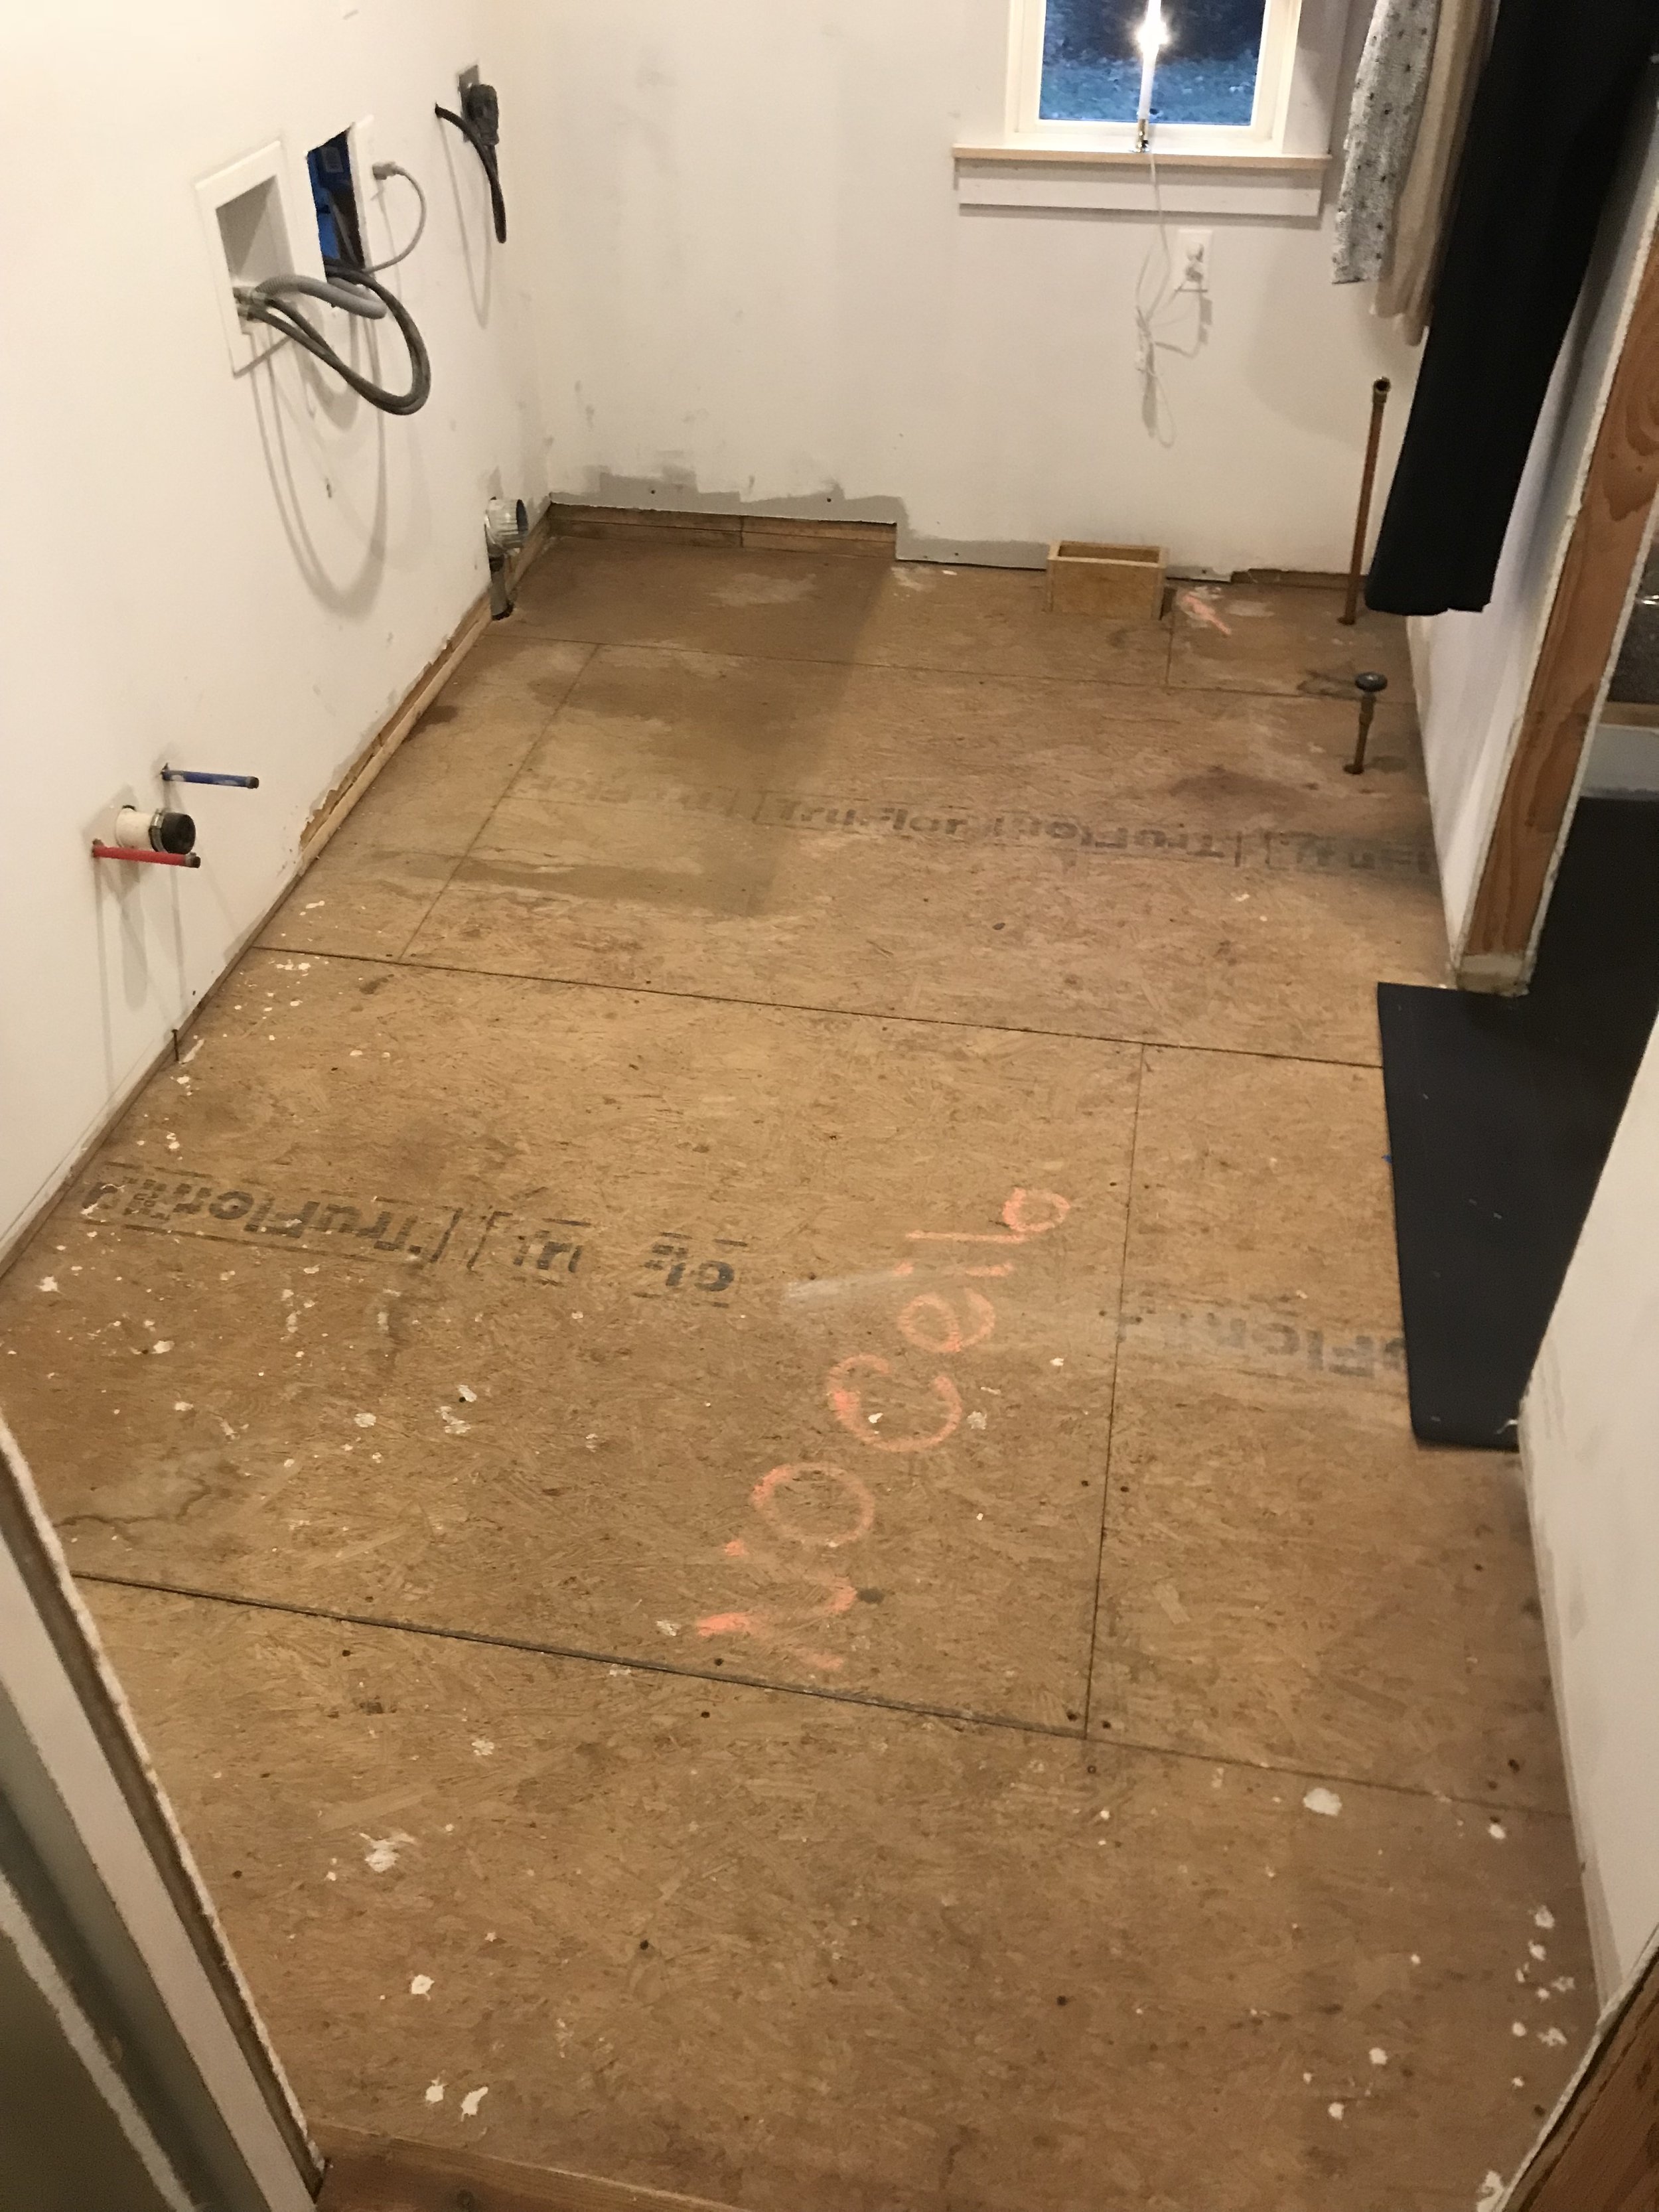  My own laundry room renovation was a project that was a few years in the making, and much more involved than my normal built-in projects. Our plans included installing a reclaimed brick floor, so the first step was to clear the room out.  